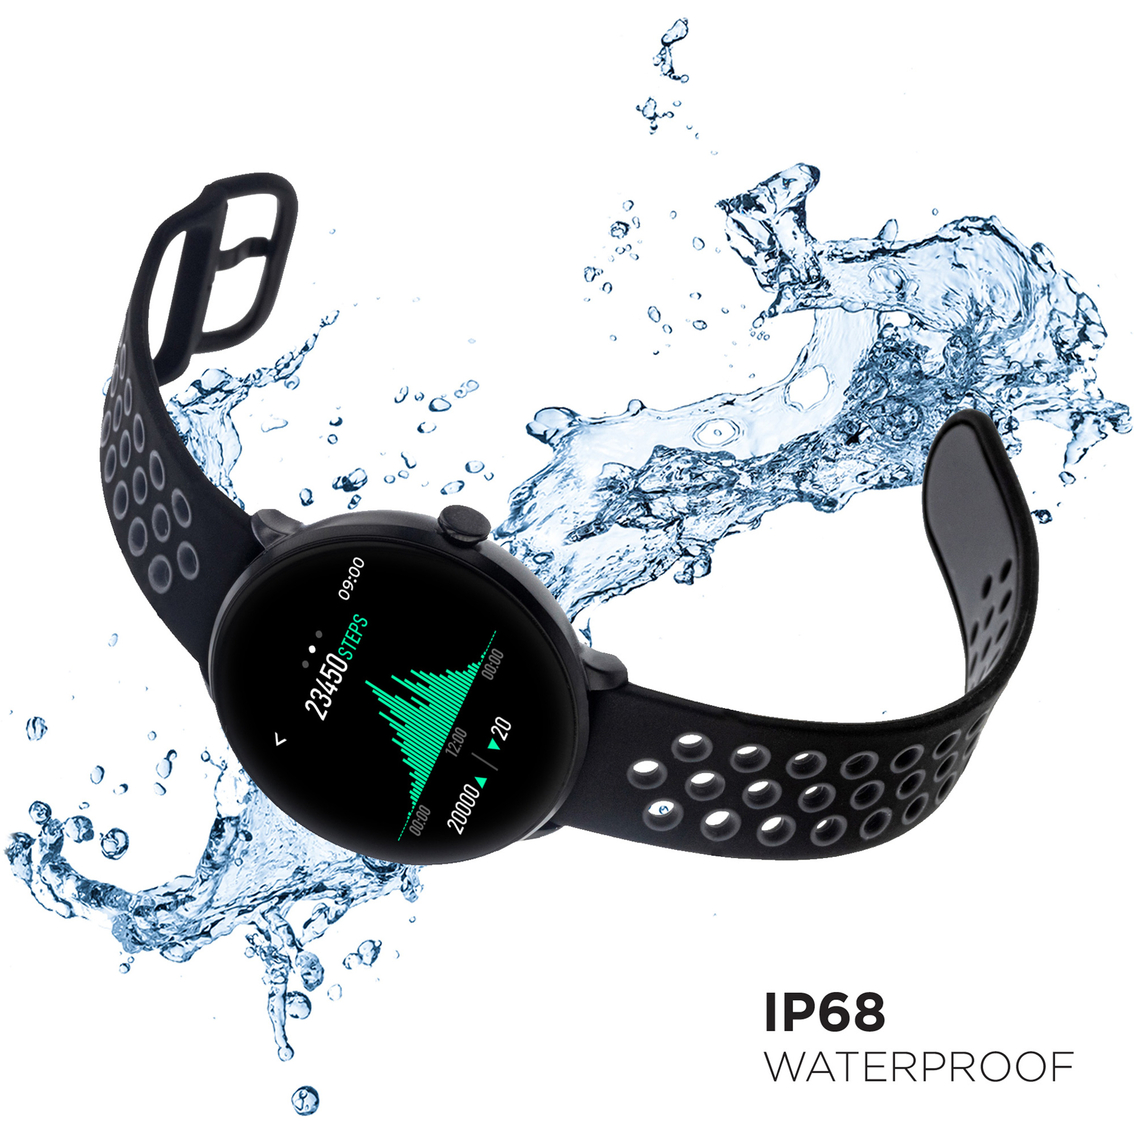 iTouch Sport 3 Smartwatch: Black Case, Black/Gray Perforated Strap 500013B-51-G04 - Image 3 of 7